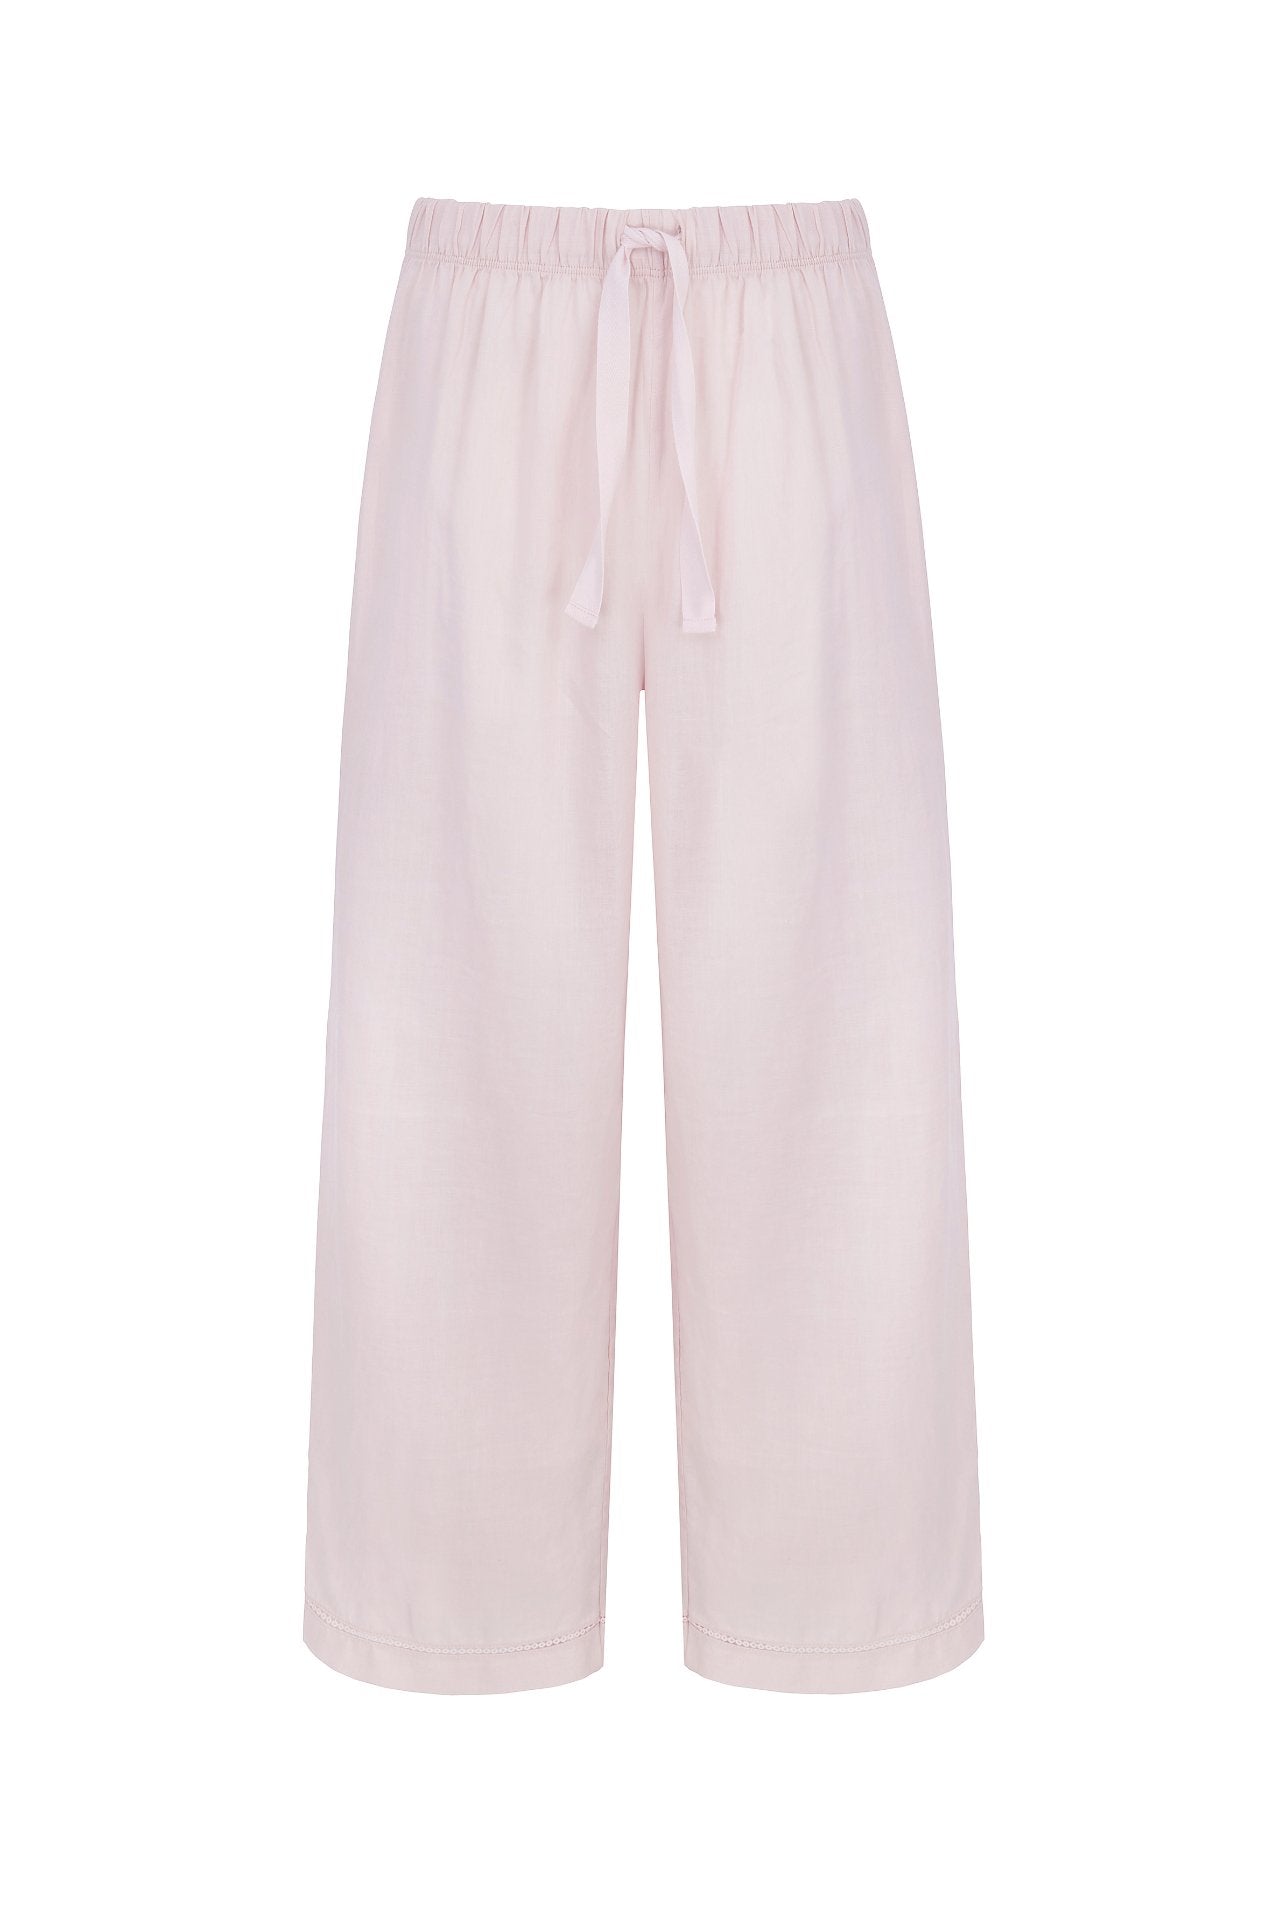 Paignton Sands Long Sleeve Top and Trouser Set in Pink - Heidi Klein - UK Store